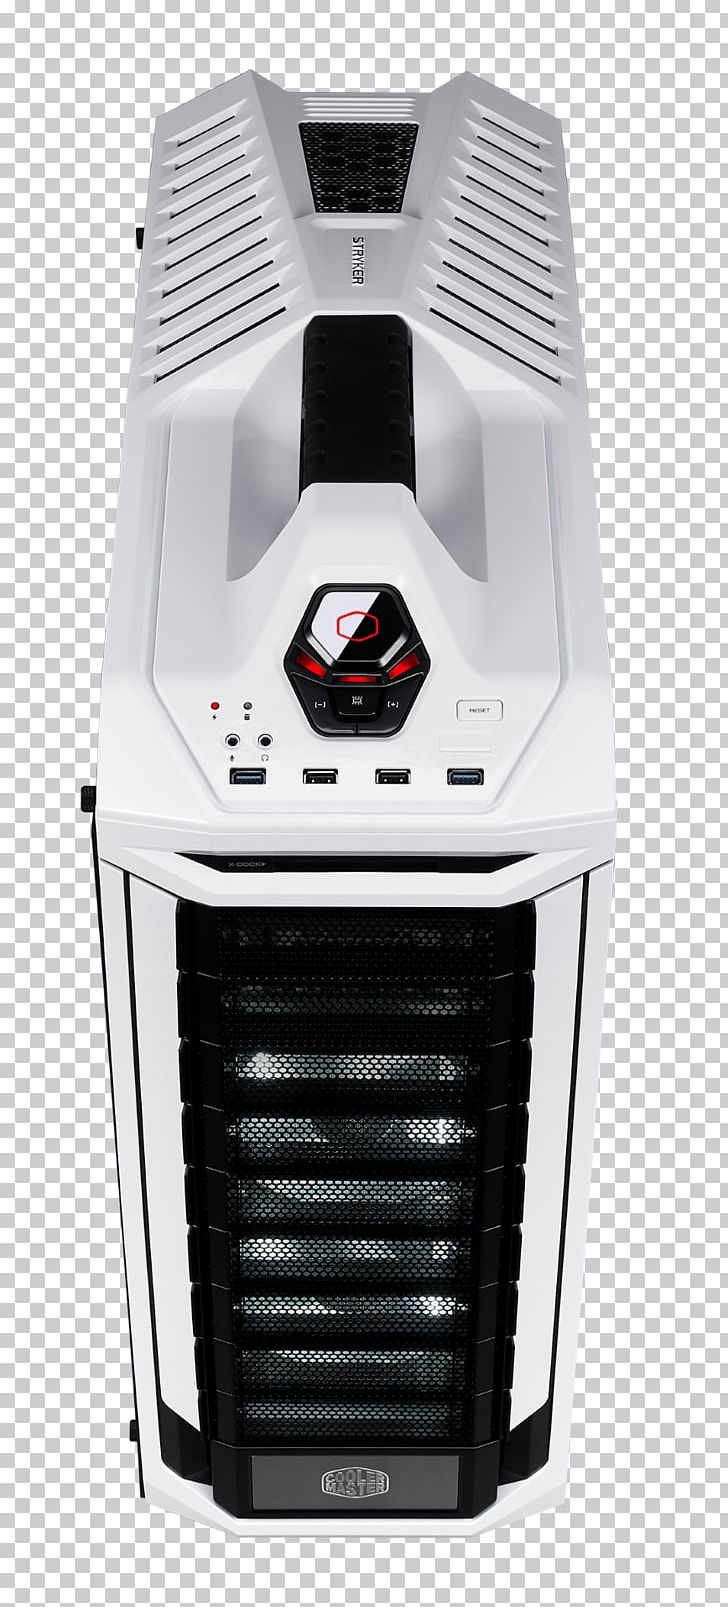 Computer Cases & Housings Cooler Master Silencio 352 ATX PNG, Clipart, Atx, Ces 2018, Computer, Computer , Computer Case Free PNG Download